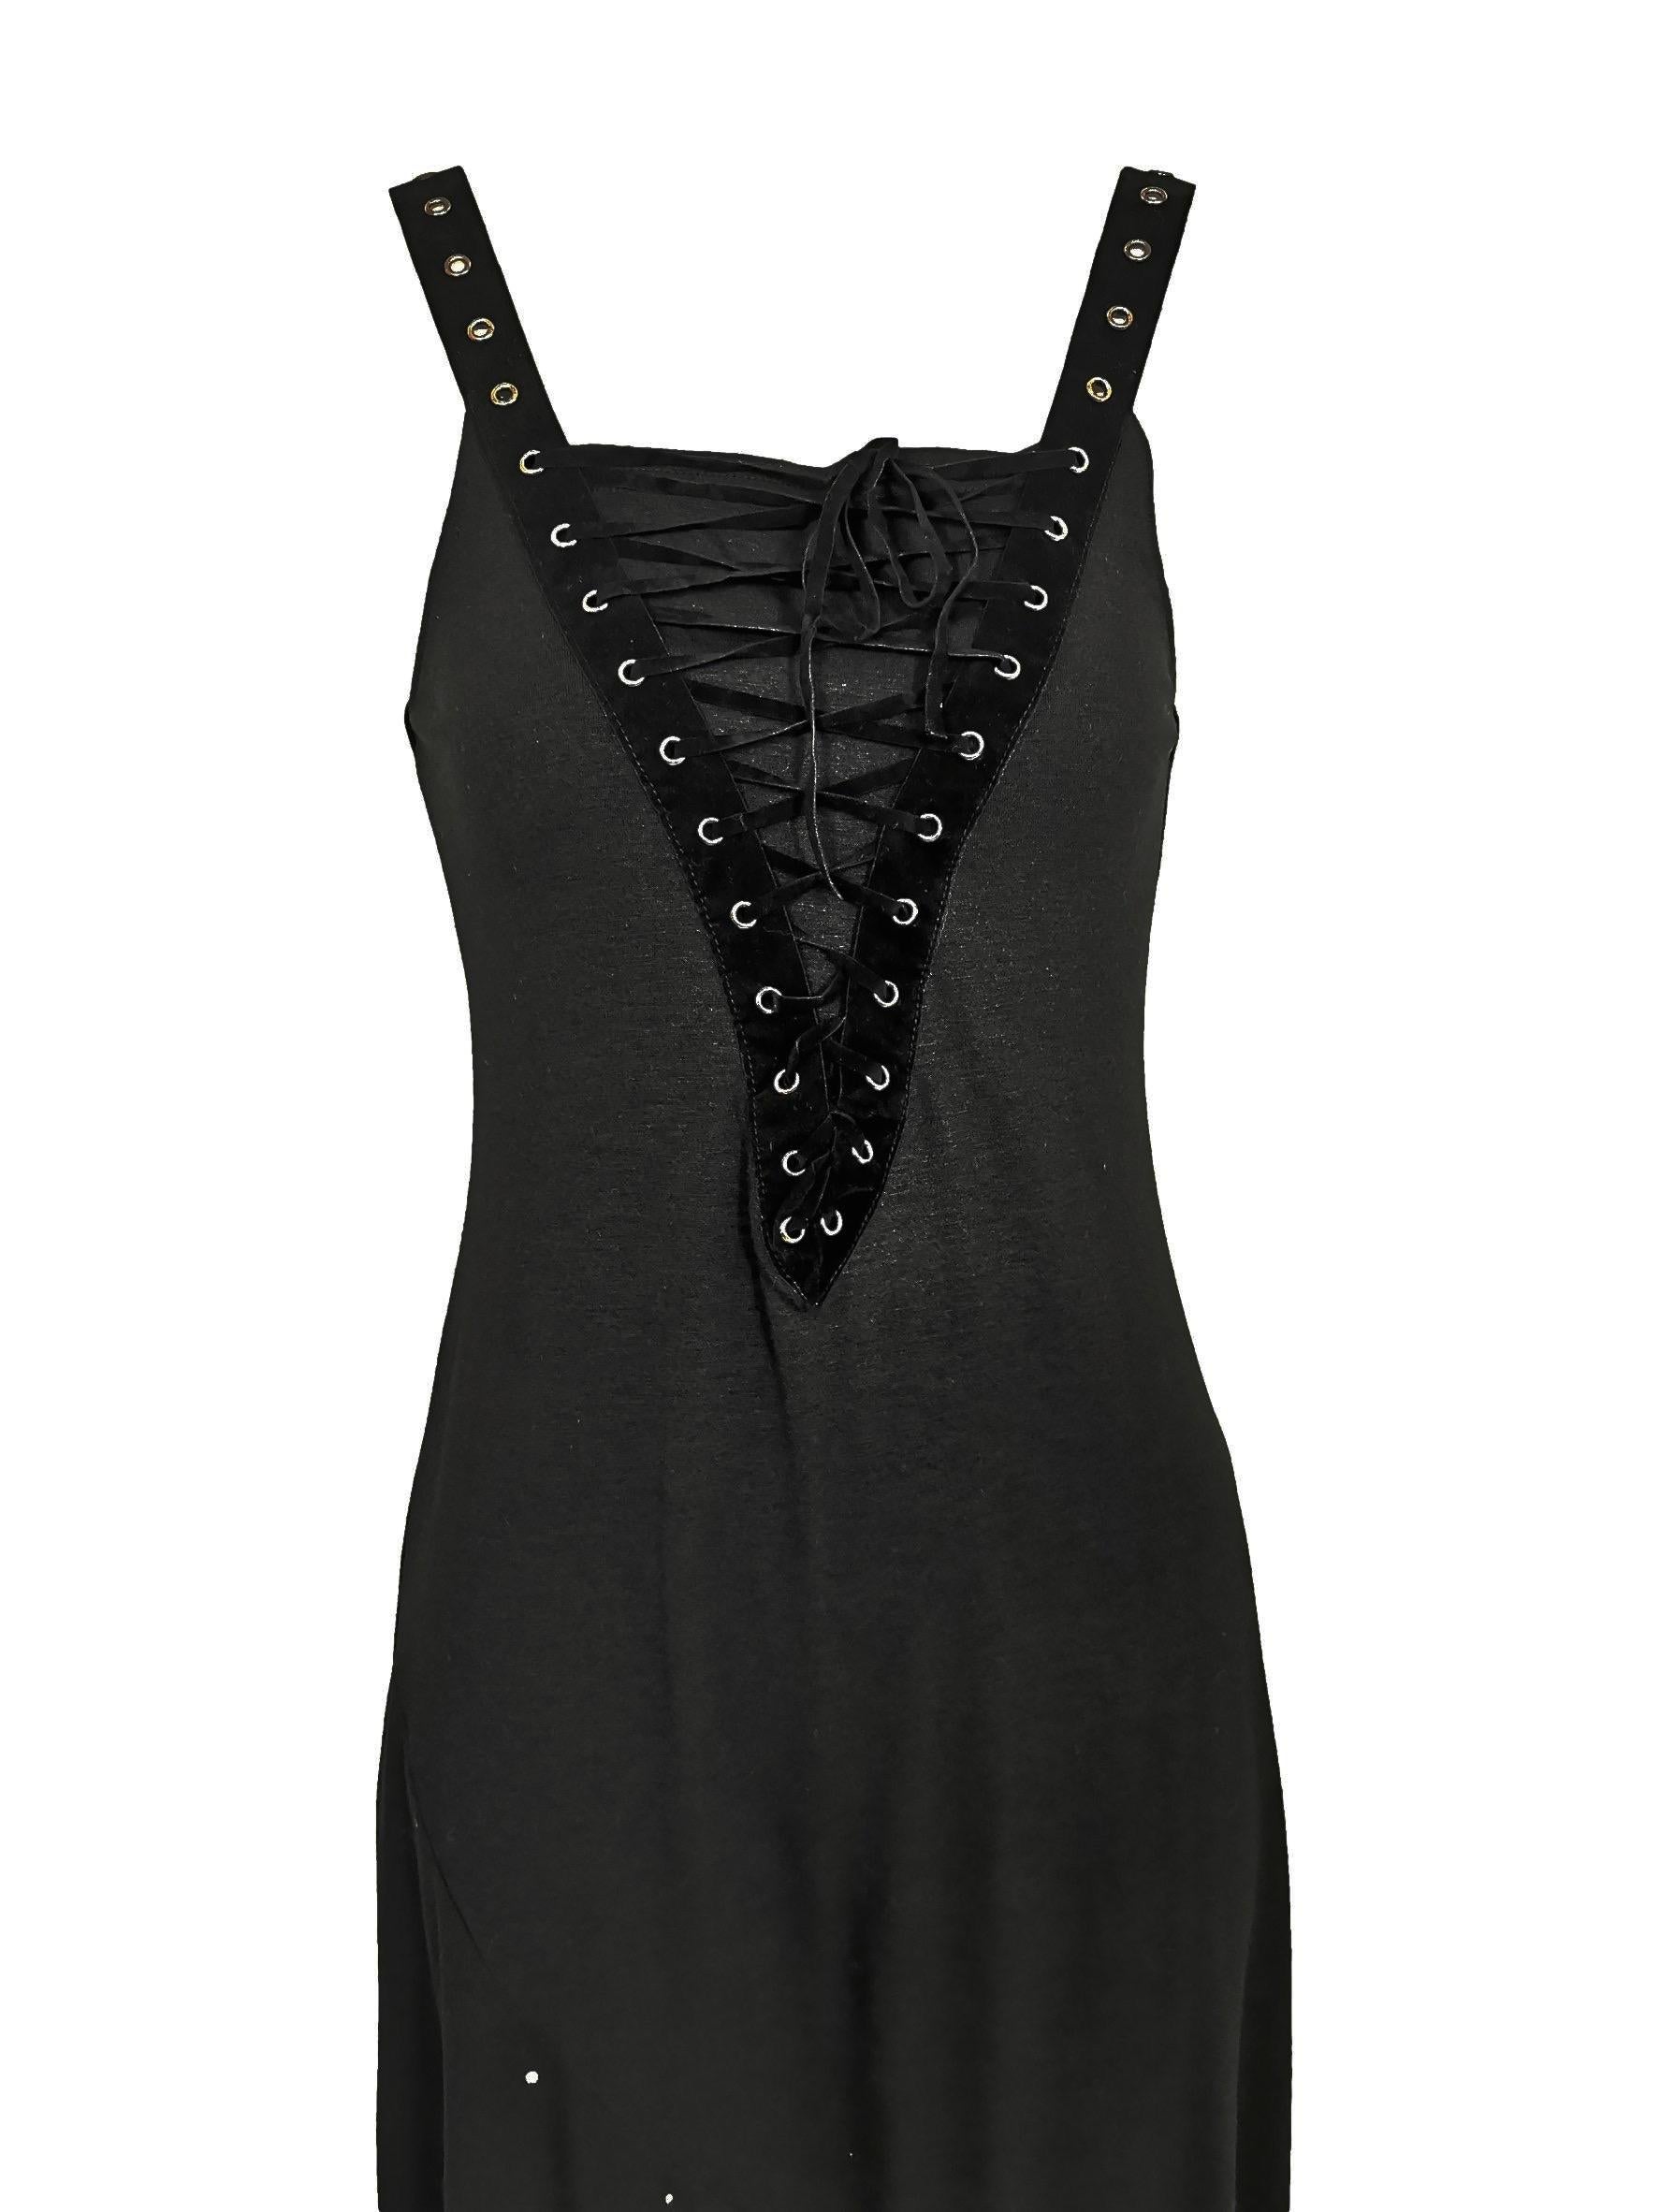 Alexander Mcqueen
Early 1990s
Jersey Slip Dress with Corset Style Laced Bodice
Size 40
